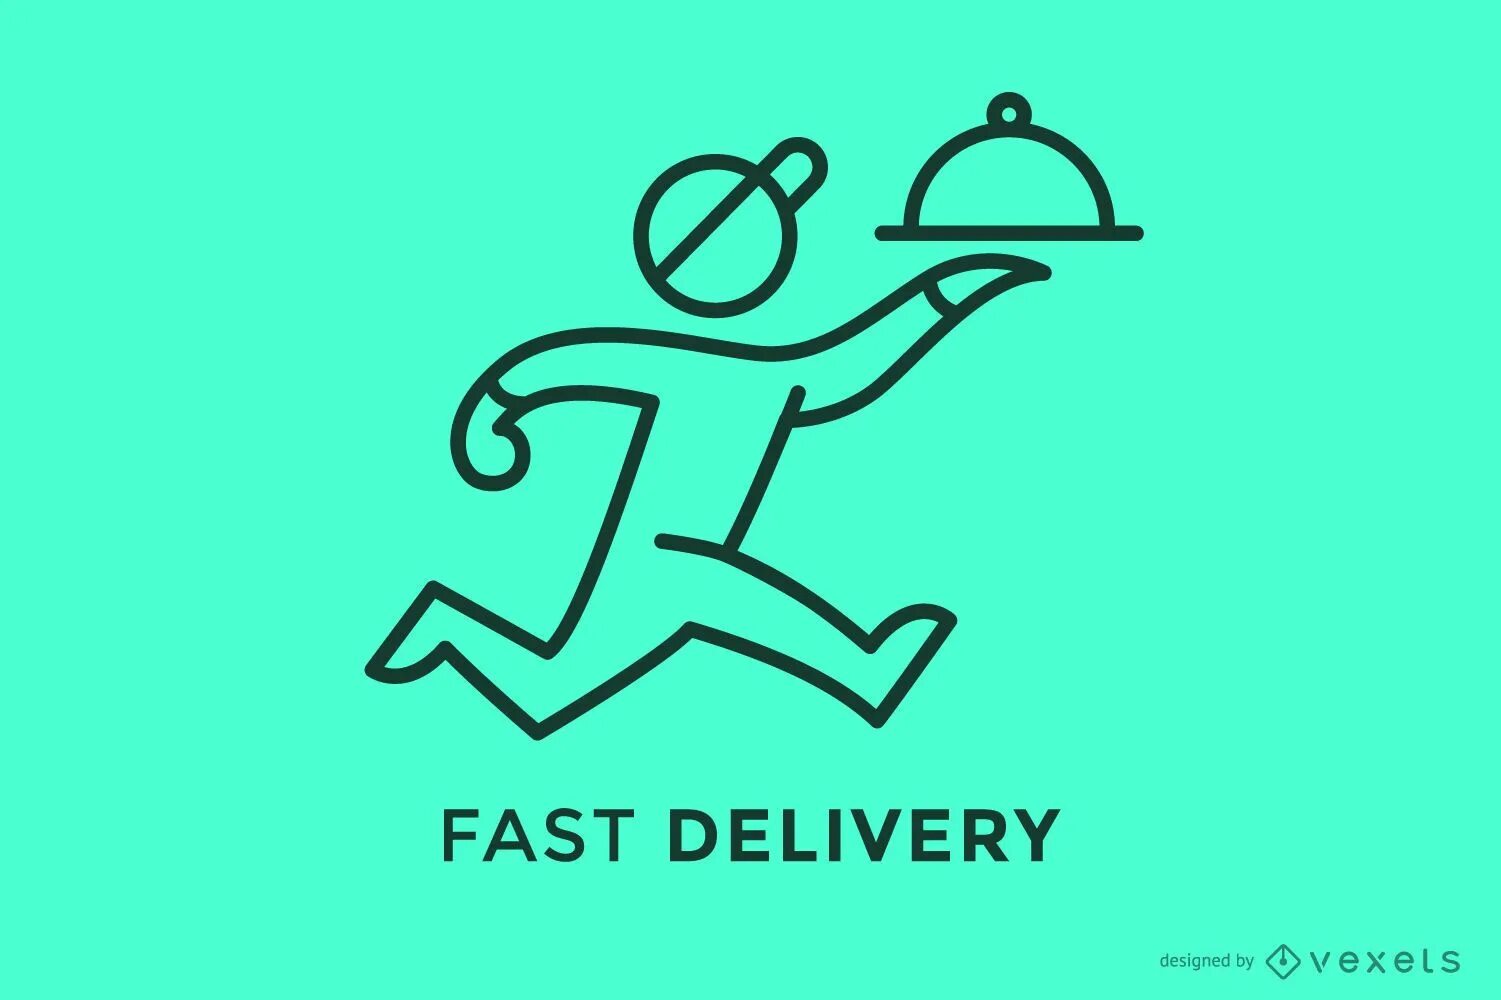 T me delivery not accepted. Fast delivery logo. Фаст Деливери лого. Локомотив сервис фаст Деливери логотип. Delivery man logo.